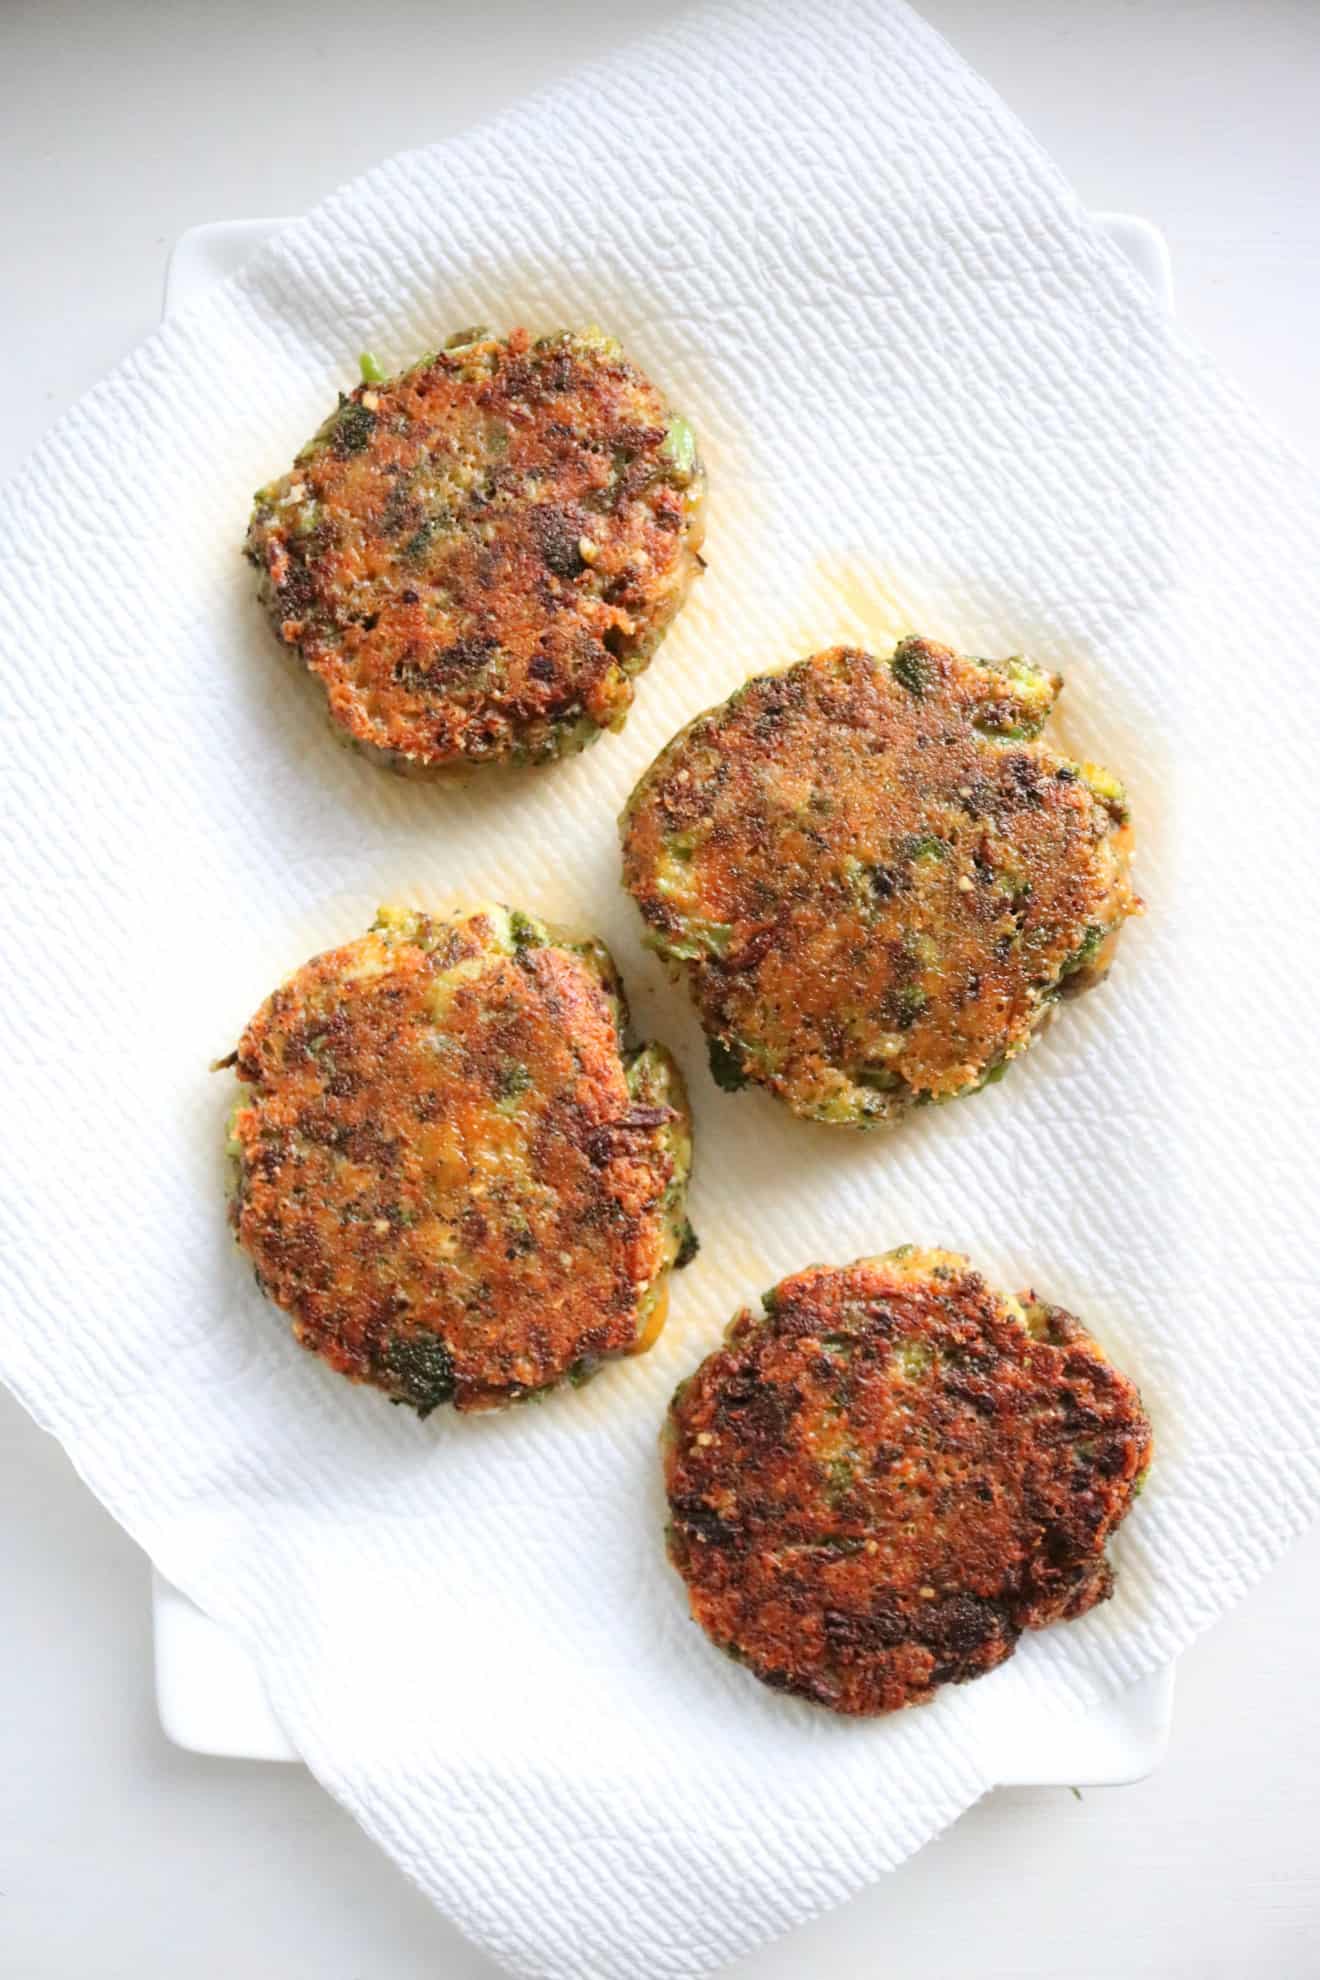 This is an overhead image of four broccoli cheddar patties golden brown and fried on the outside The patties sit on a white paper towel. 